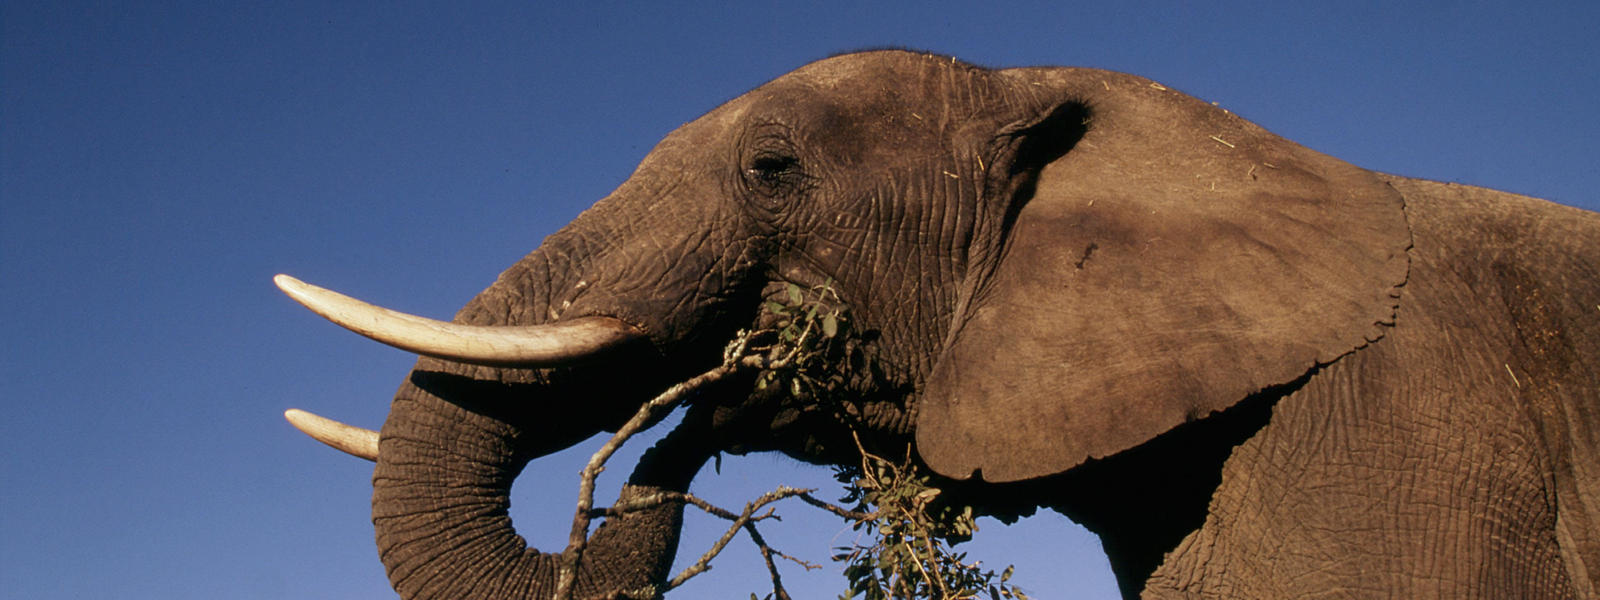 What is an enemy of the African elephant?